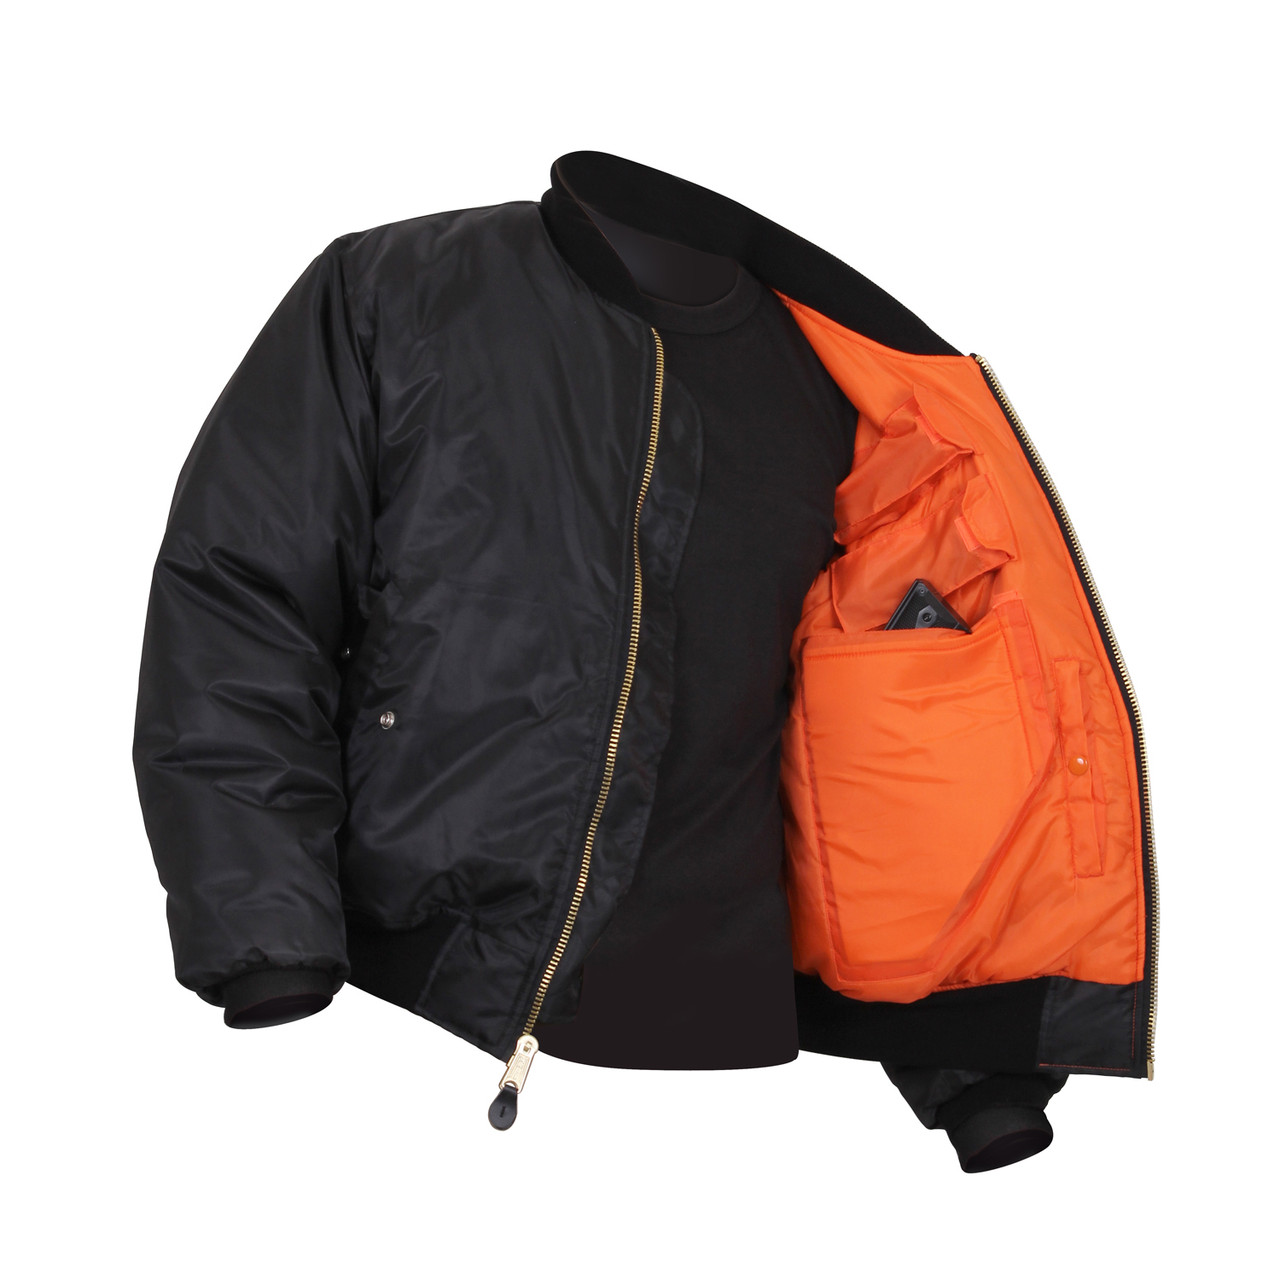 Rothco Reversible Lined Jacket With Hood